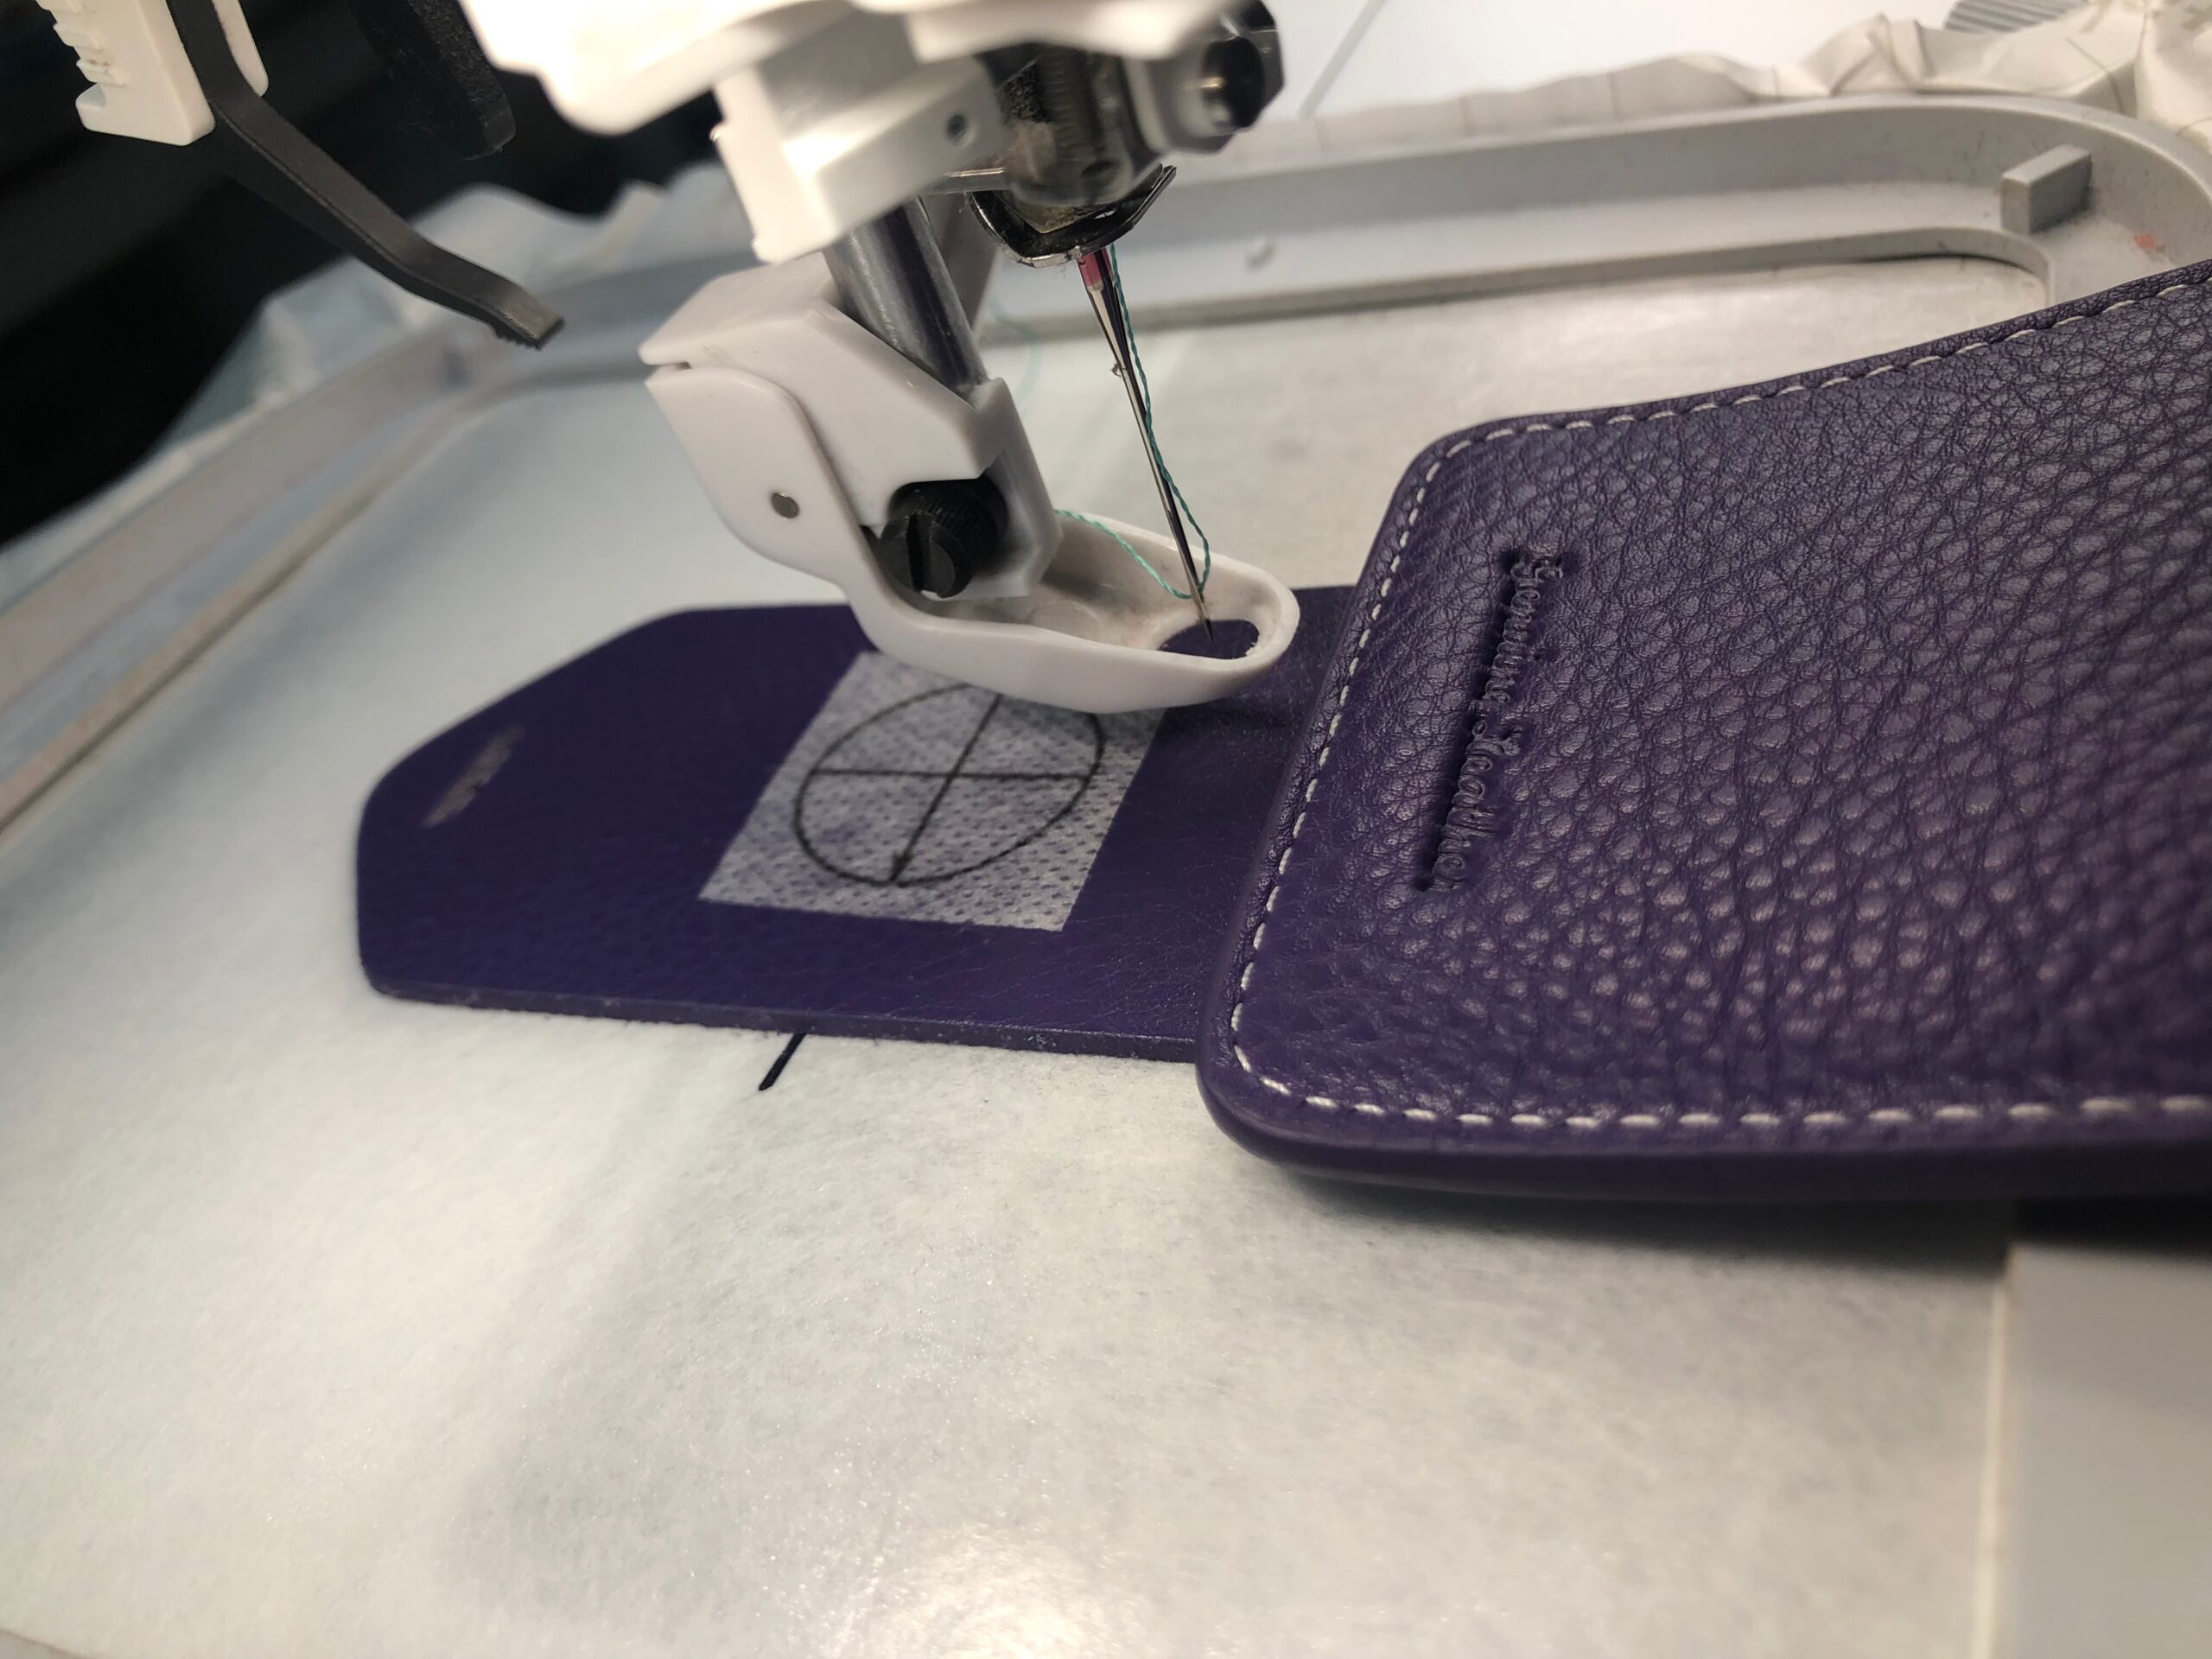 check embroidery placement on luggage tag